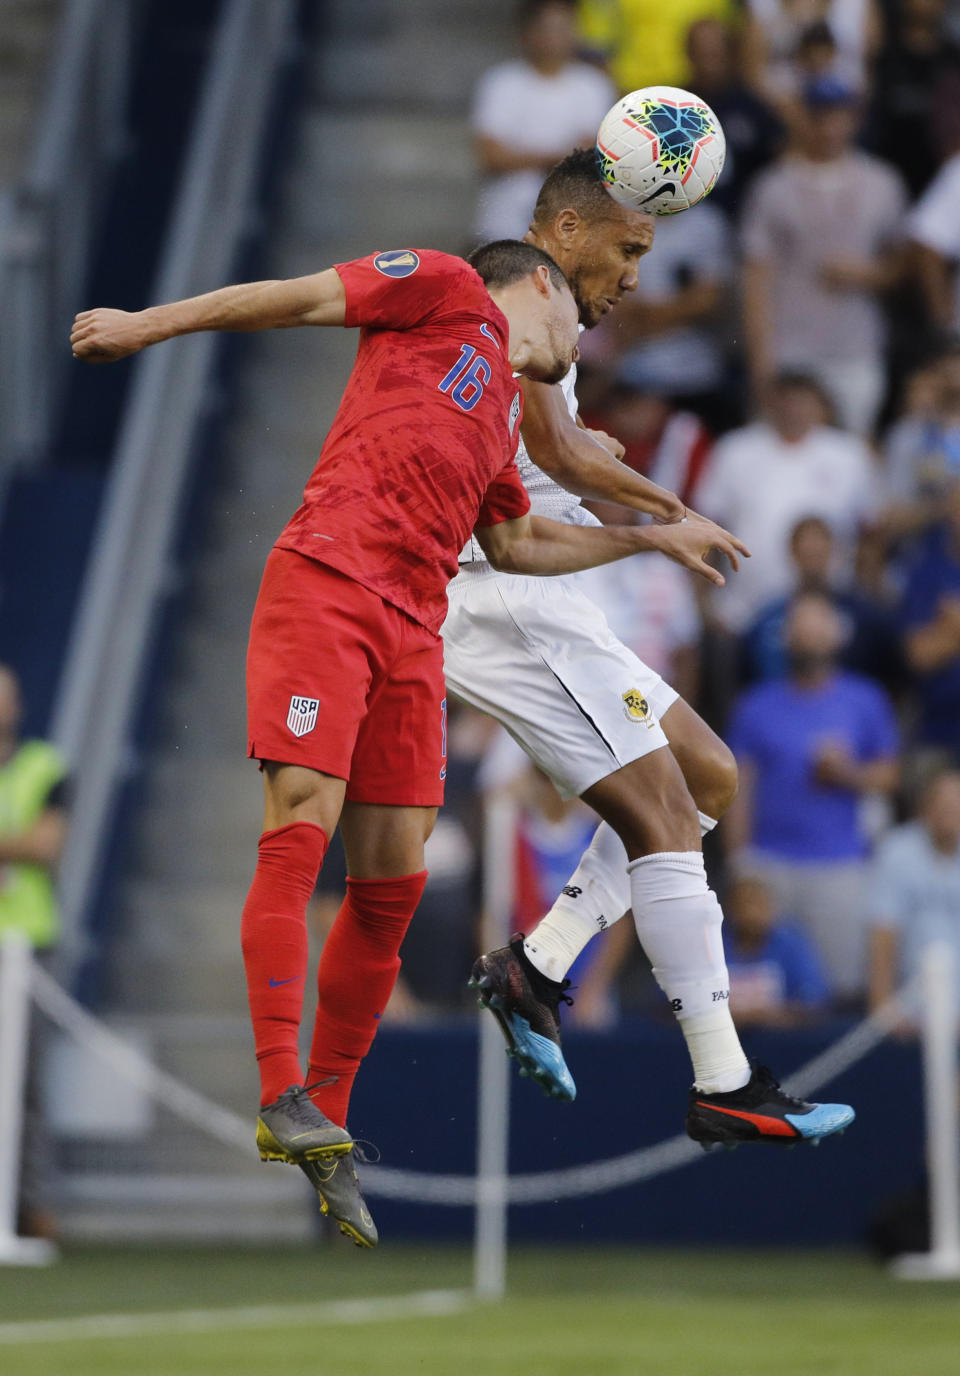 U.S. defender Daniel Lovitz (16) and Panama defender Francisco Palacios go for a head ball during the first half of a CONCACAF Gold Cup soccer match in Kansas City, Kan., Wednesday, June 26, 2019. (AP Photo/Colin E. Braley)